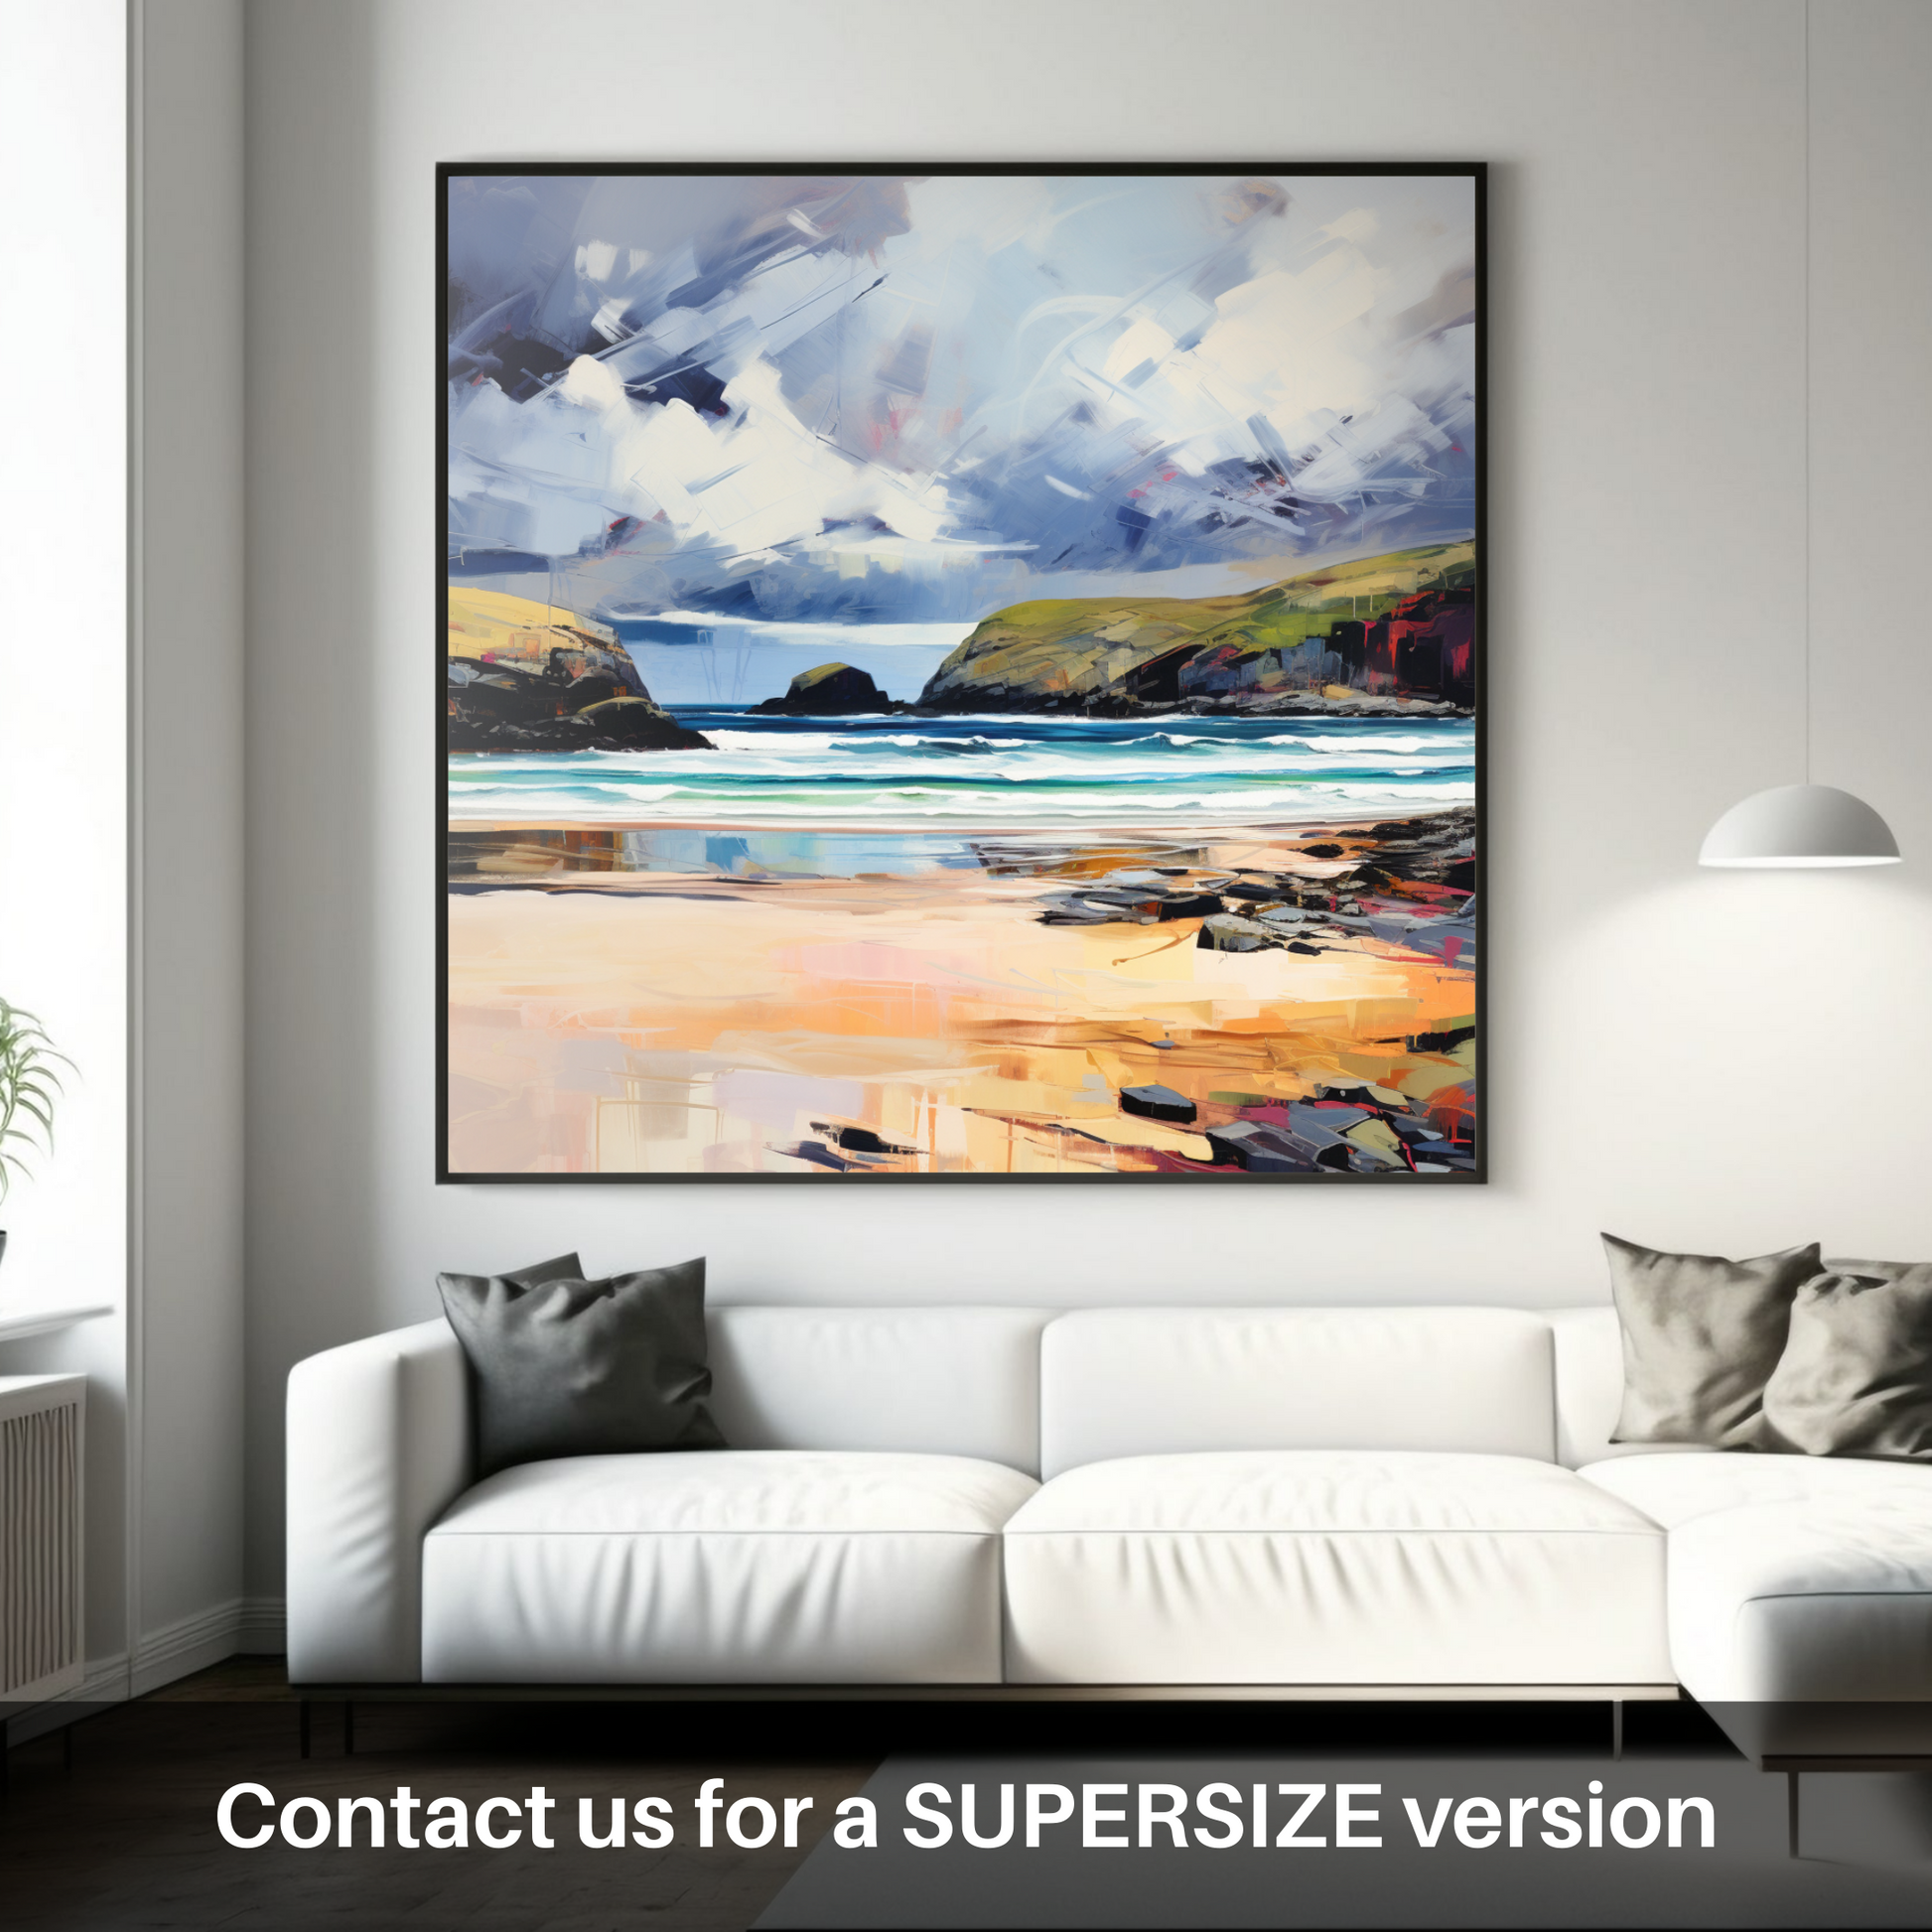 Huge supersize print of Sandwood Bay with a stormy sky